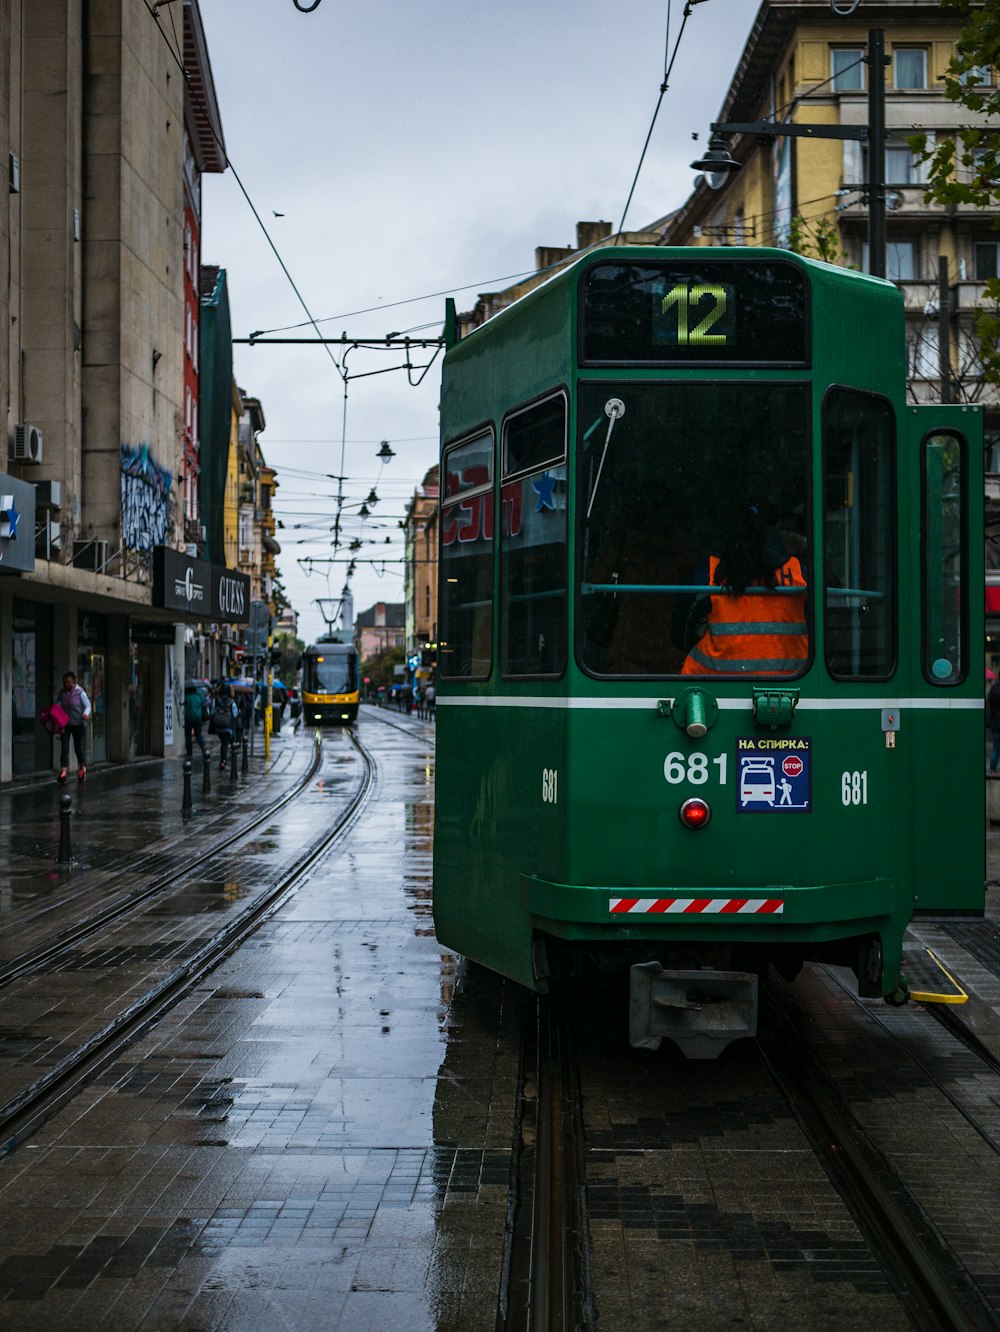 green tram on the street during daytime